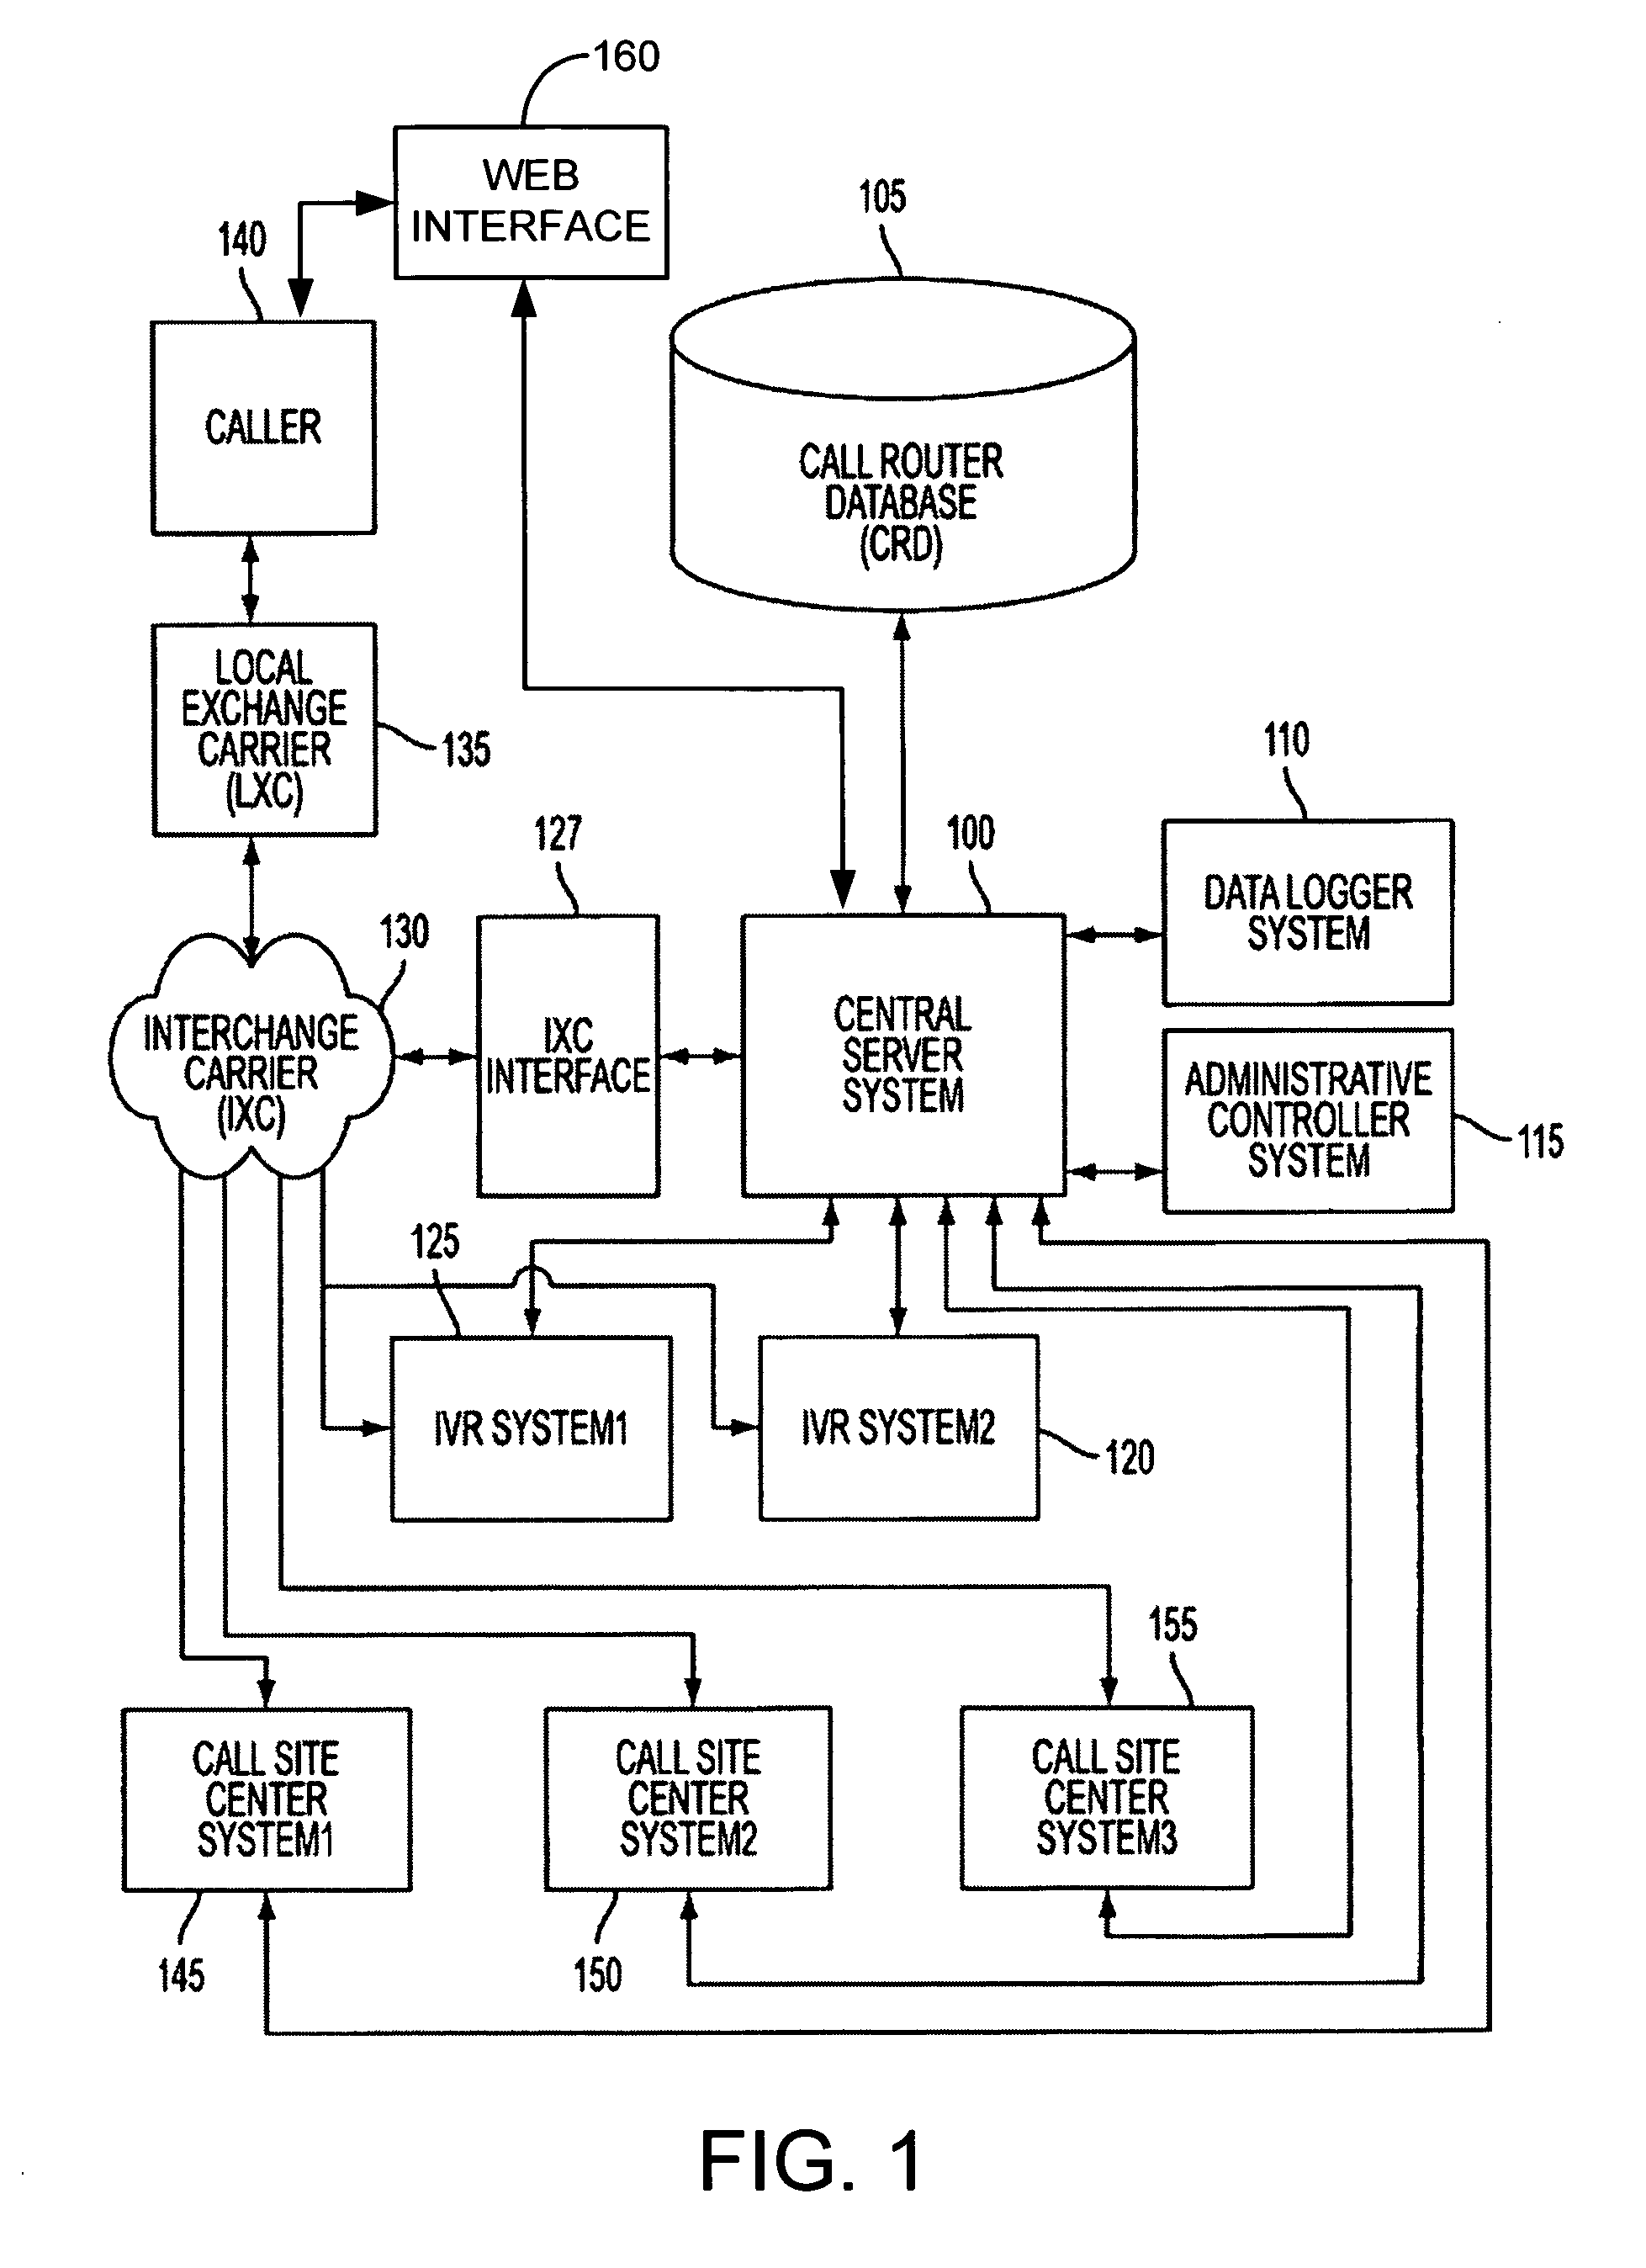 System and method for providing call-back options